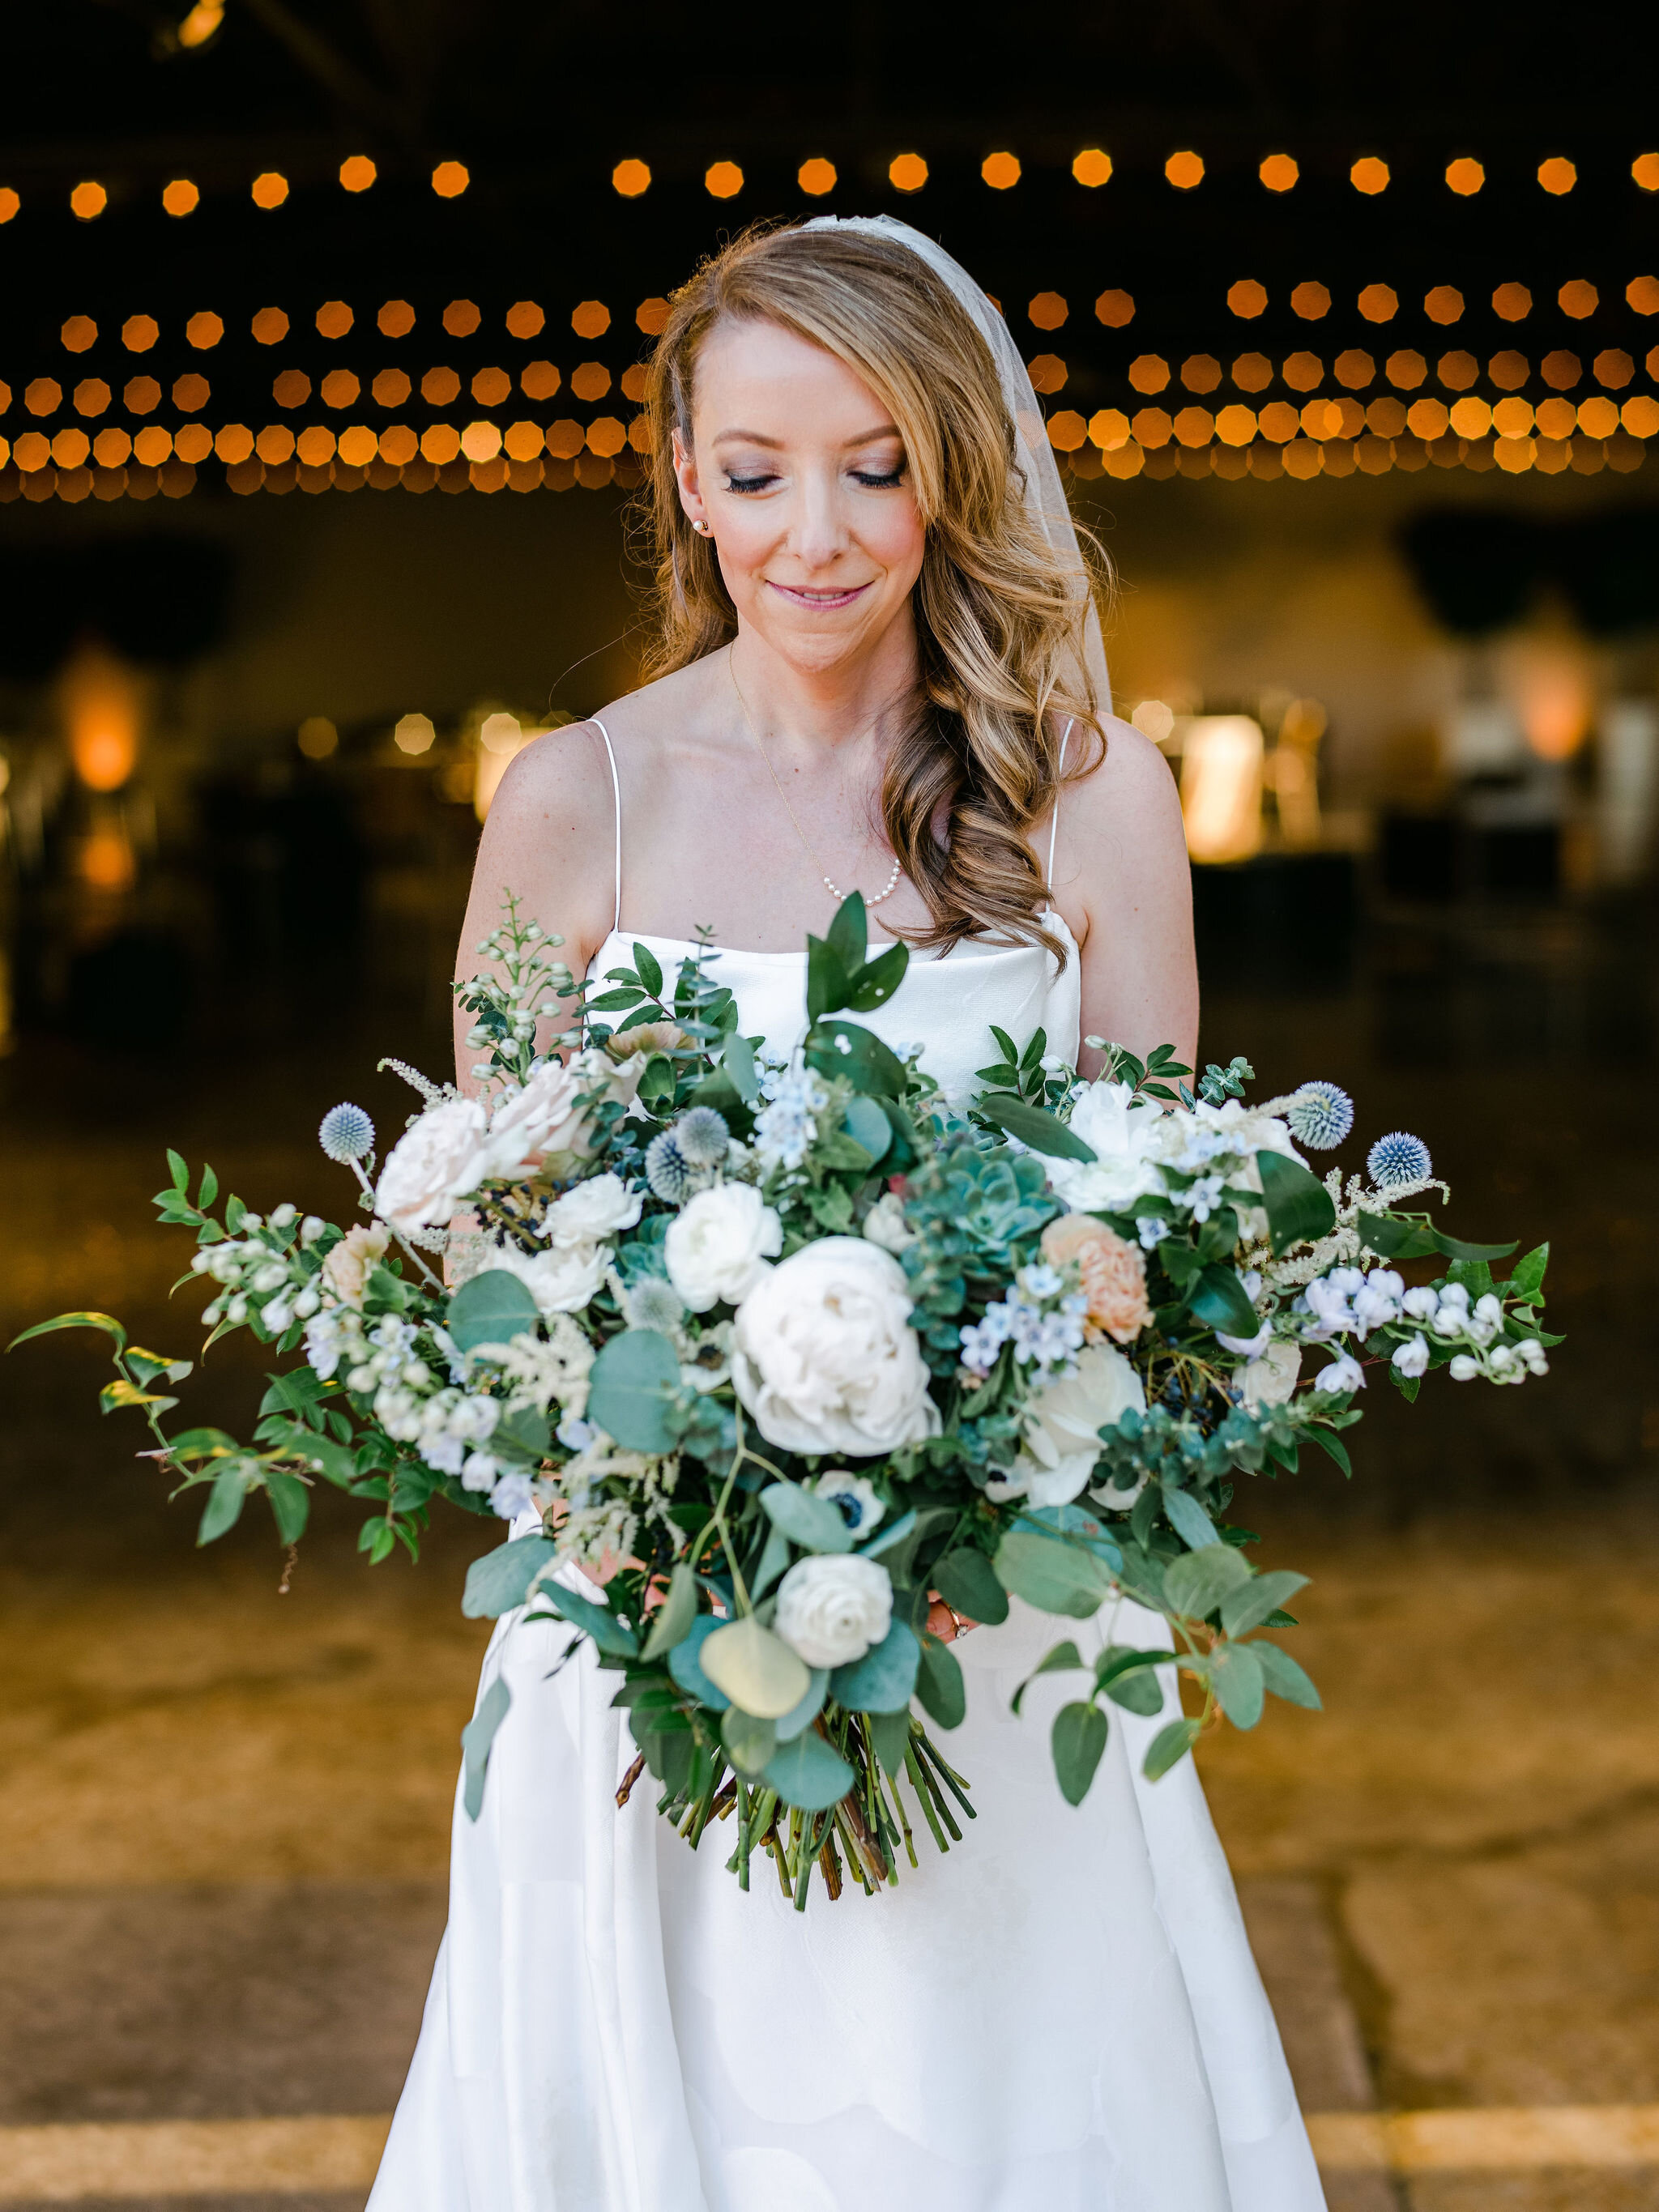 A lush and sprawling bridal bouquet filled to the brim. Blush and white garden roses, white peonies, blue thistle, delphinium, blue tweedia, white astilbe, white ranunculus, baby and silver dollar eucalyptus, huckleberry, and smilax vine are just so…